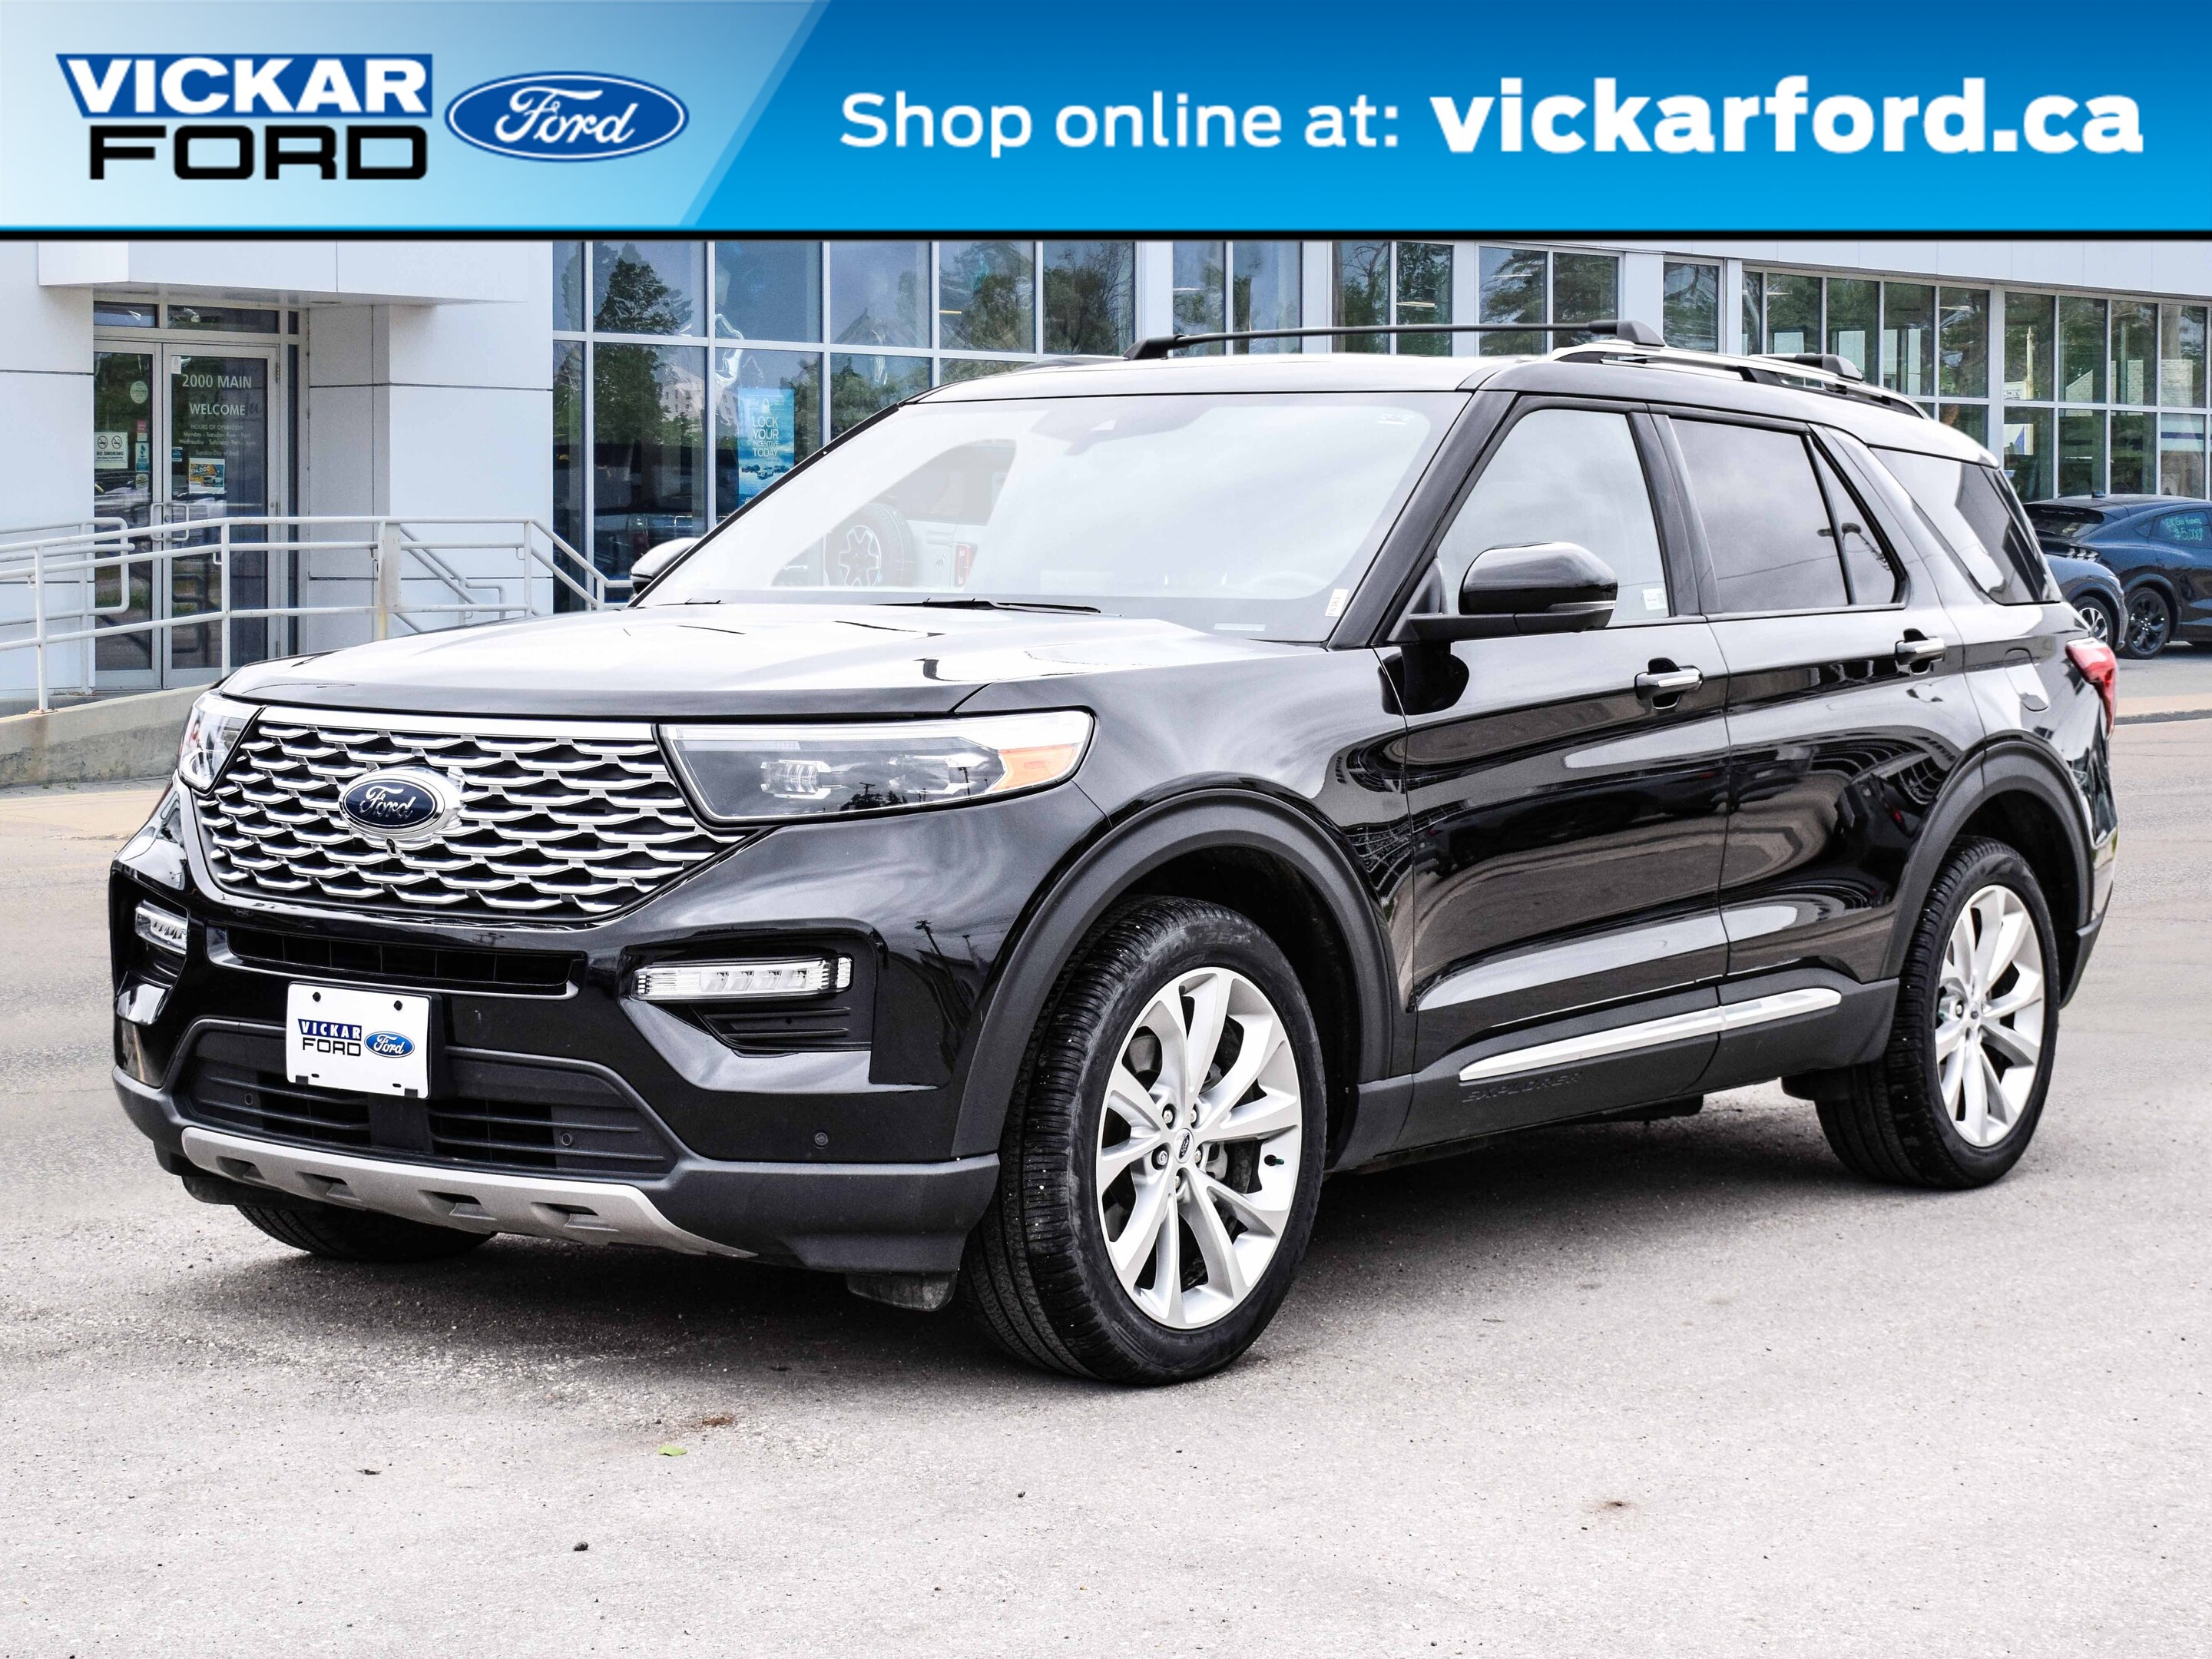 2022 Ford Explorer Platinum 4WD Powerful 3.0L Ecoboost All the Luxury